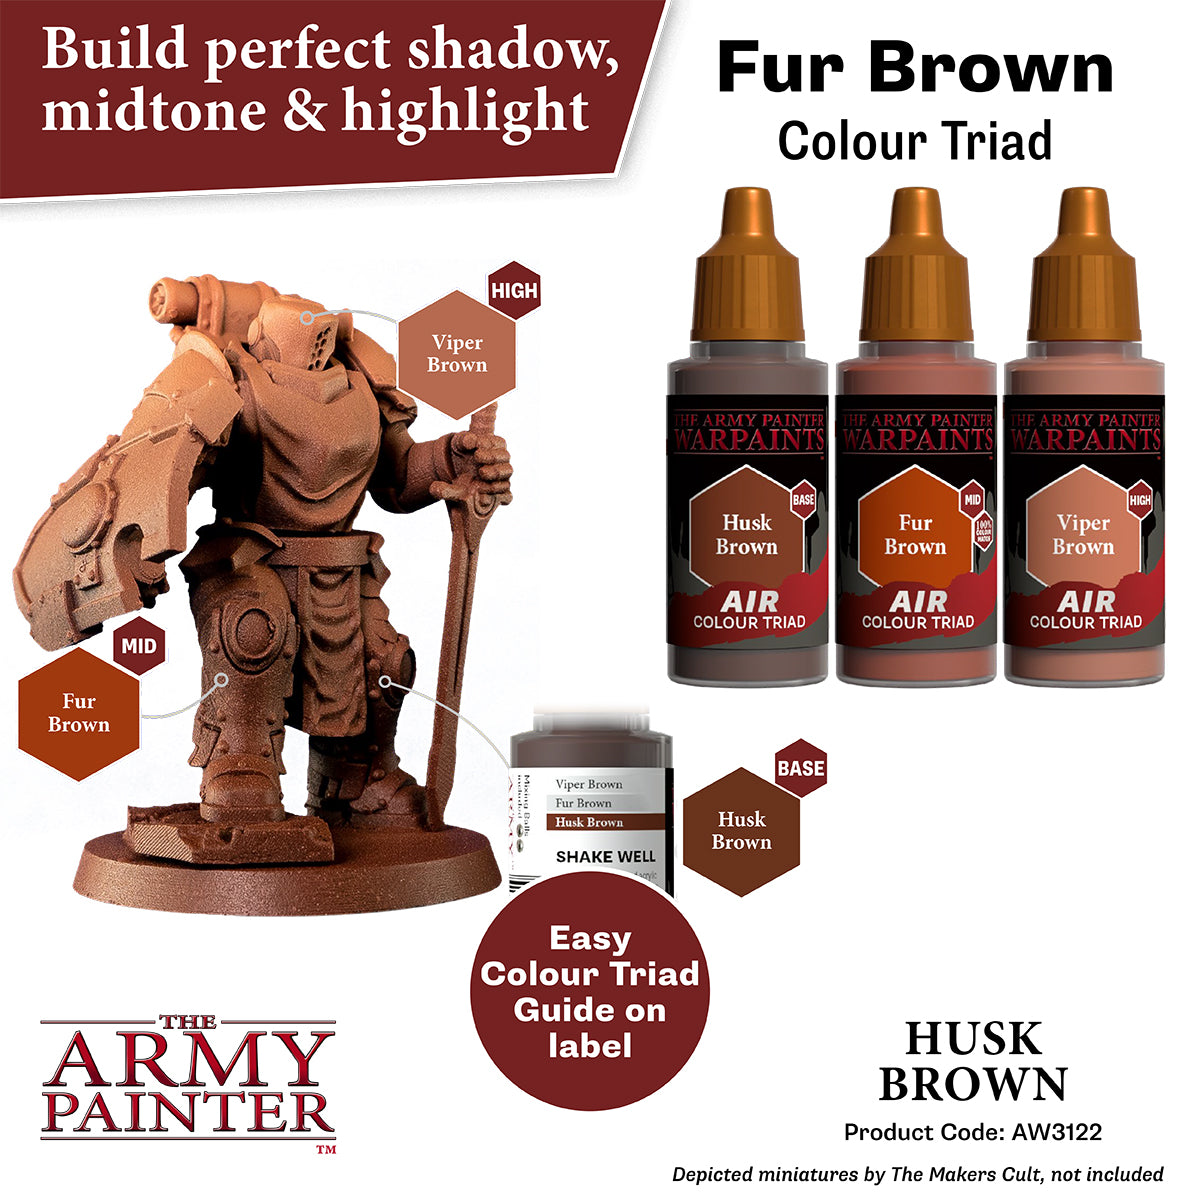 Goonhammer Reviews: The Army Painter Air Paints